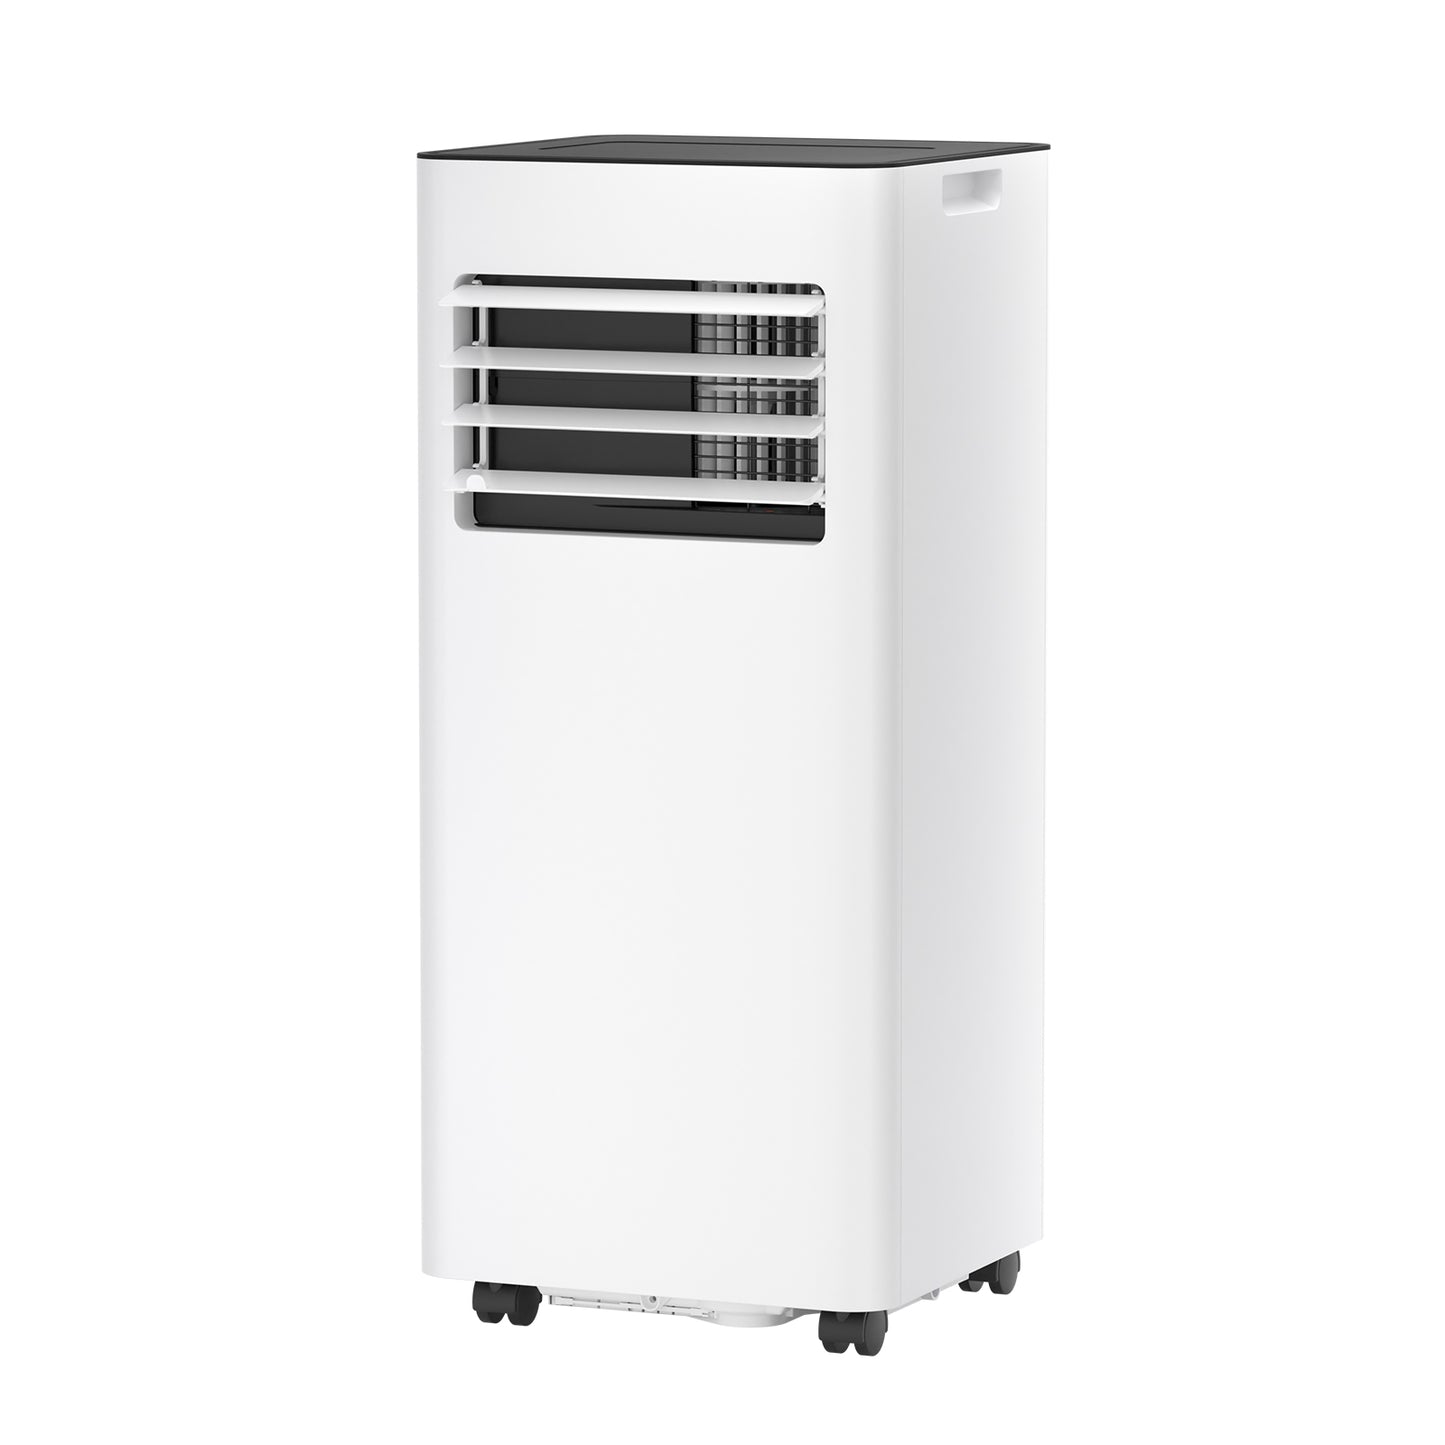 ZAFRO 8,000/10,000 BTU Portable Air Conditioner 3 Modes & Speeds with remote control/24H Timer /LED Display for Bedroom/Office/Living room, White